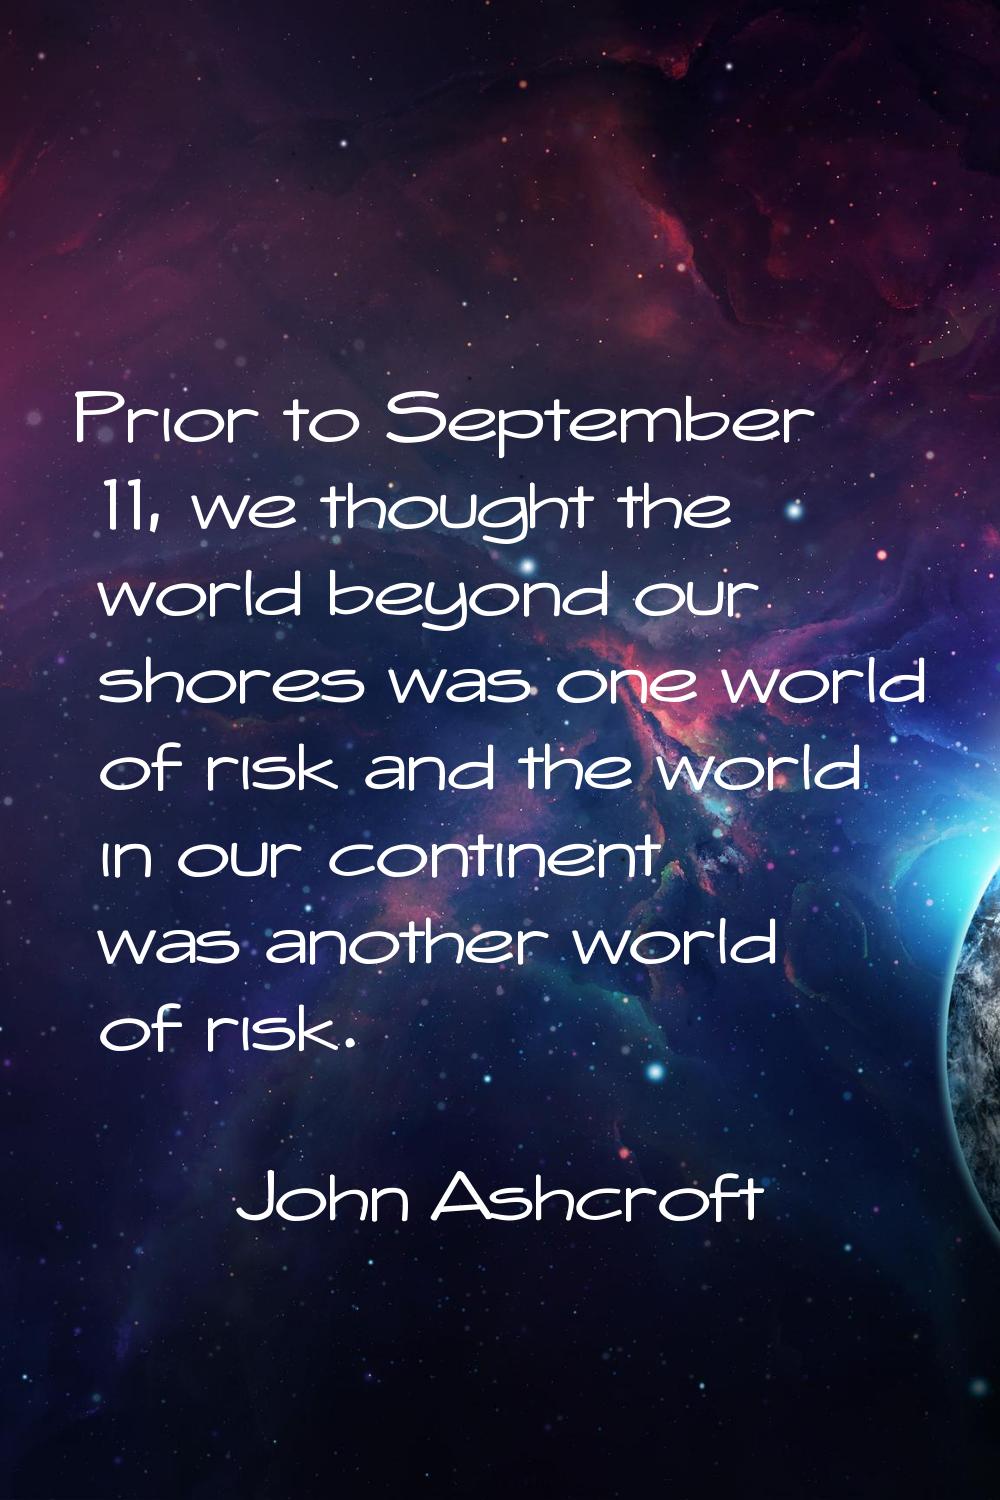 Prior to September 11, we thought the world beyond our shores was one world of risk and the world i